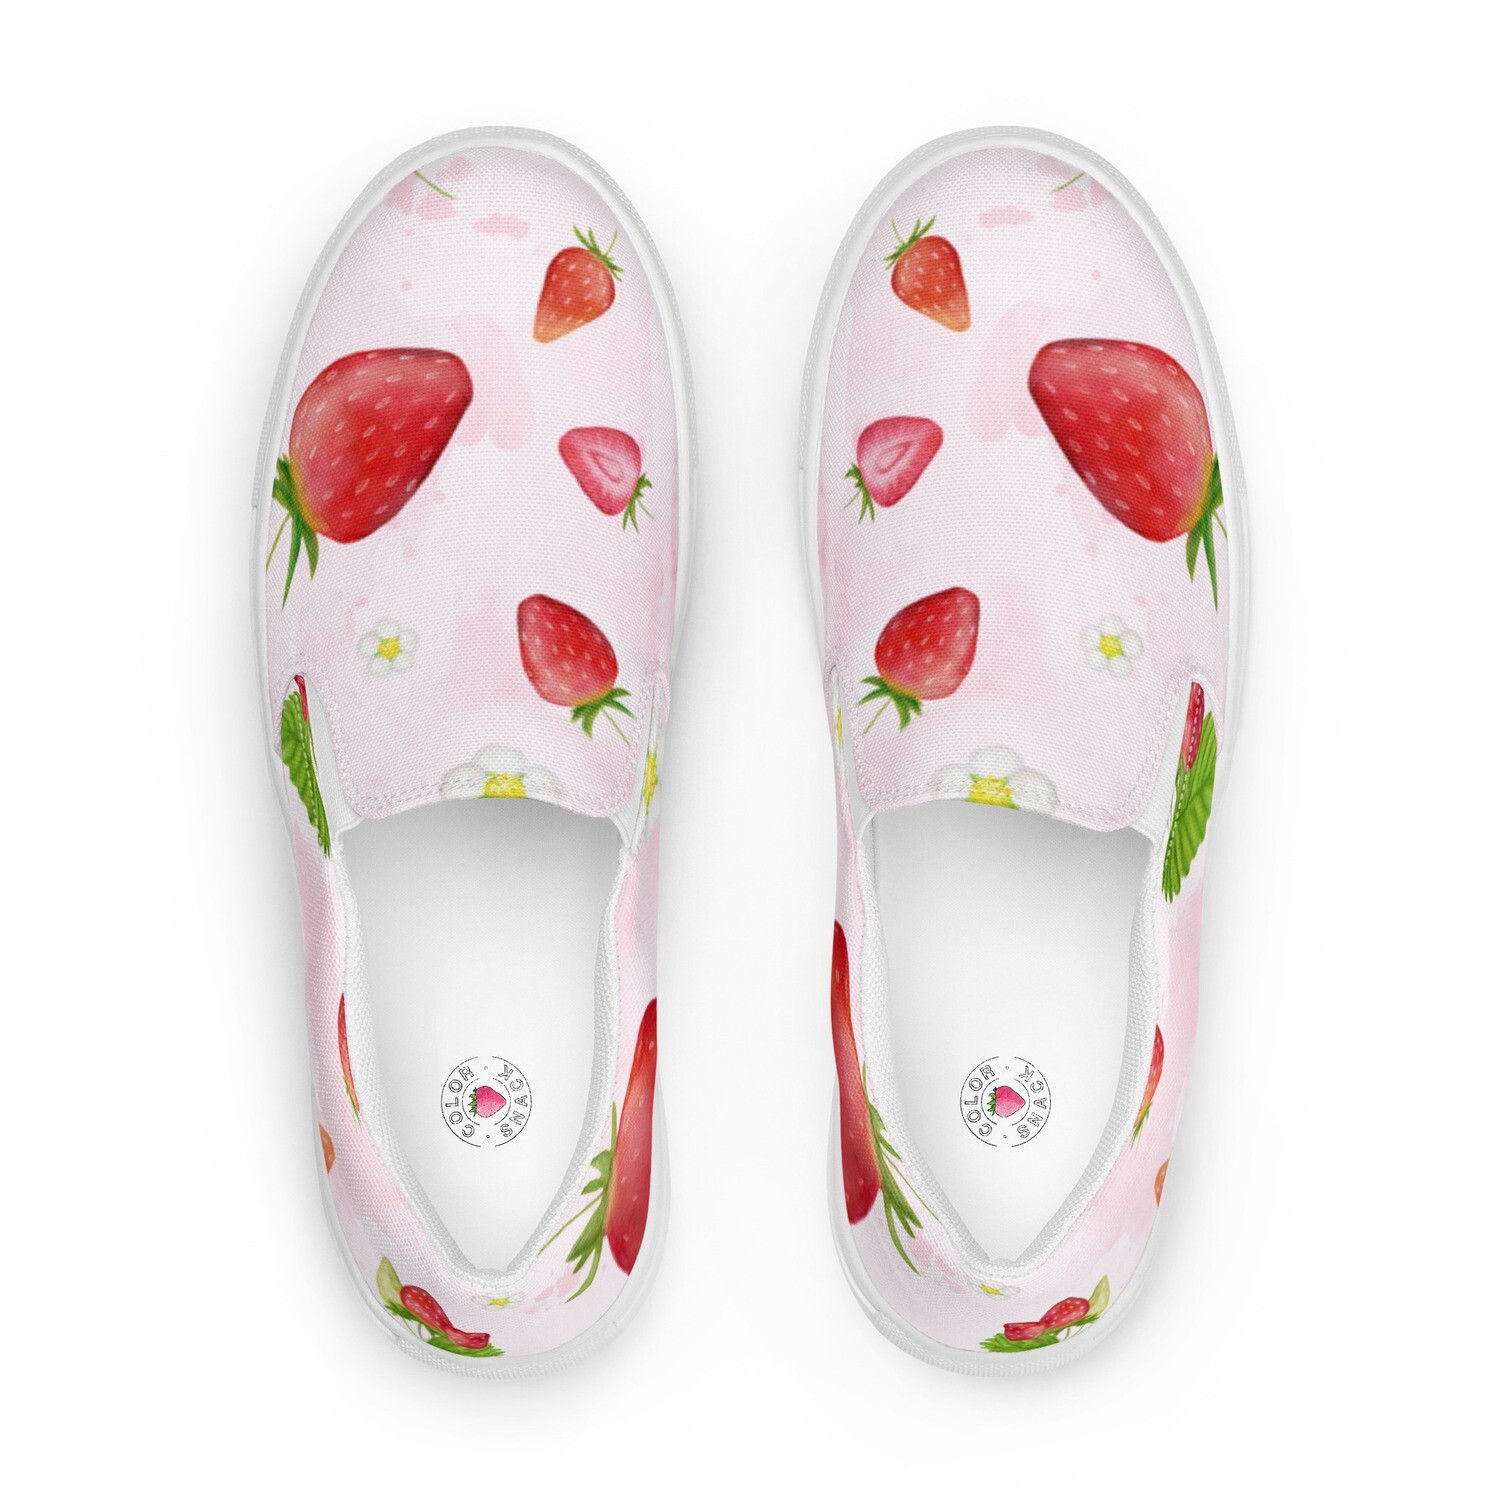 Women’s slip-on canvas shoes - Strawberry Dreams